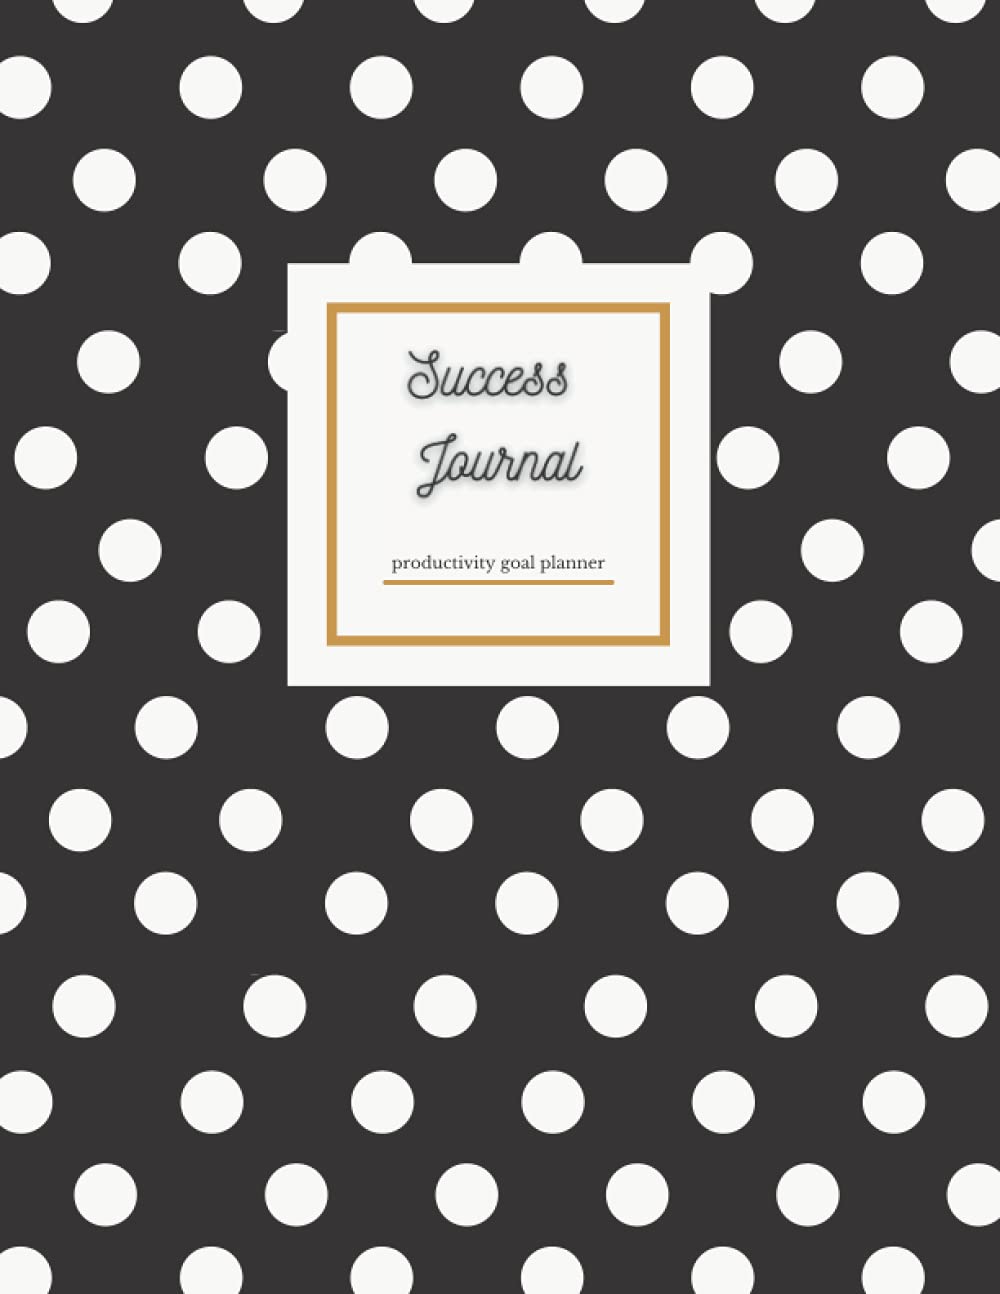 Success Journal a Productivity Goal Planner, 90 Day Goal Book for Personal, Business & Carrier, Money, Health & Fitness Goals: Large 8.5 x 11 inches ... Planner, Beautiful 120 Colored Pages Planner